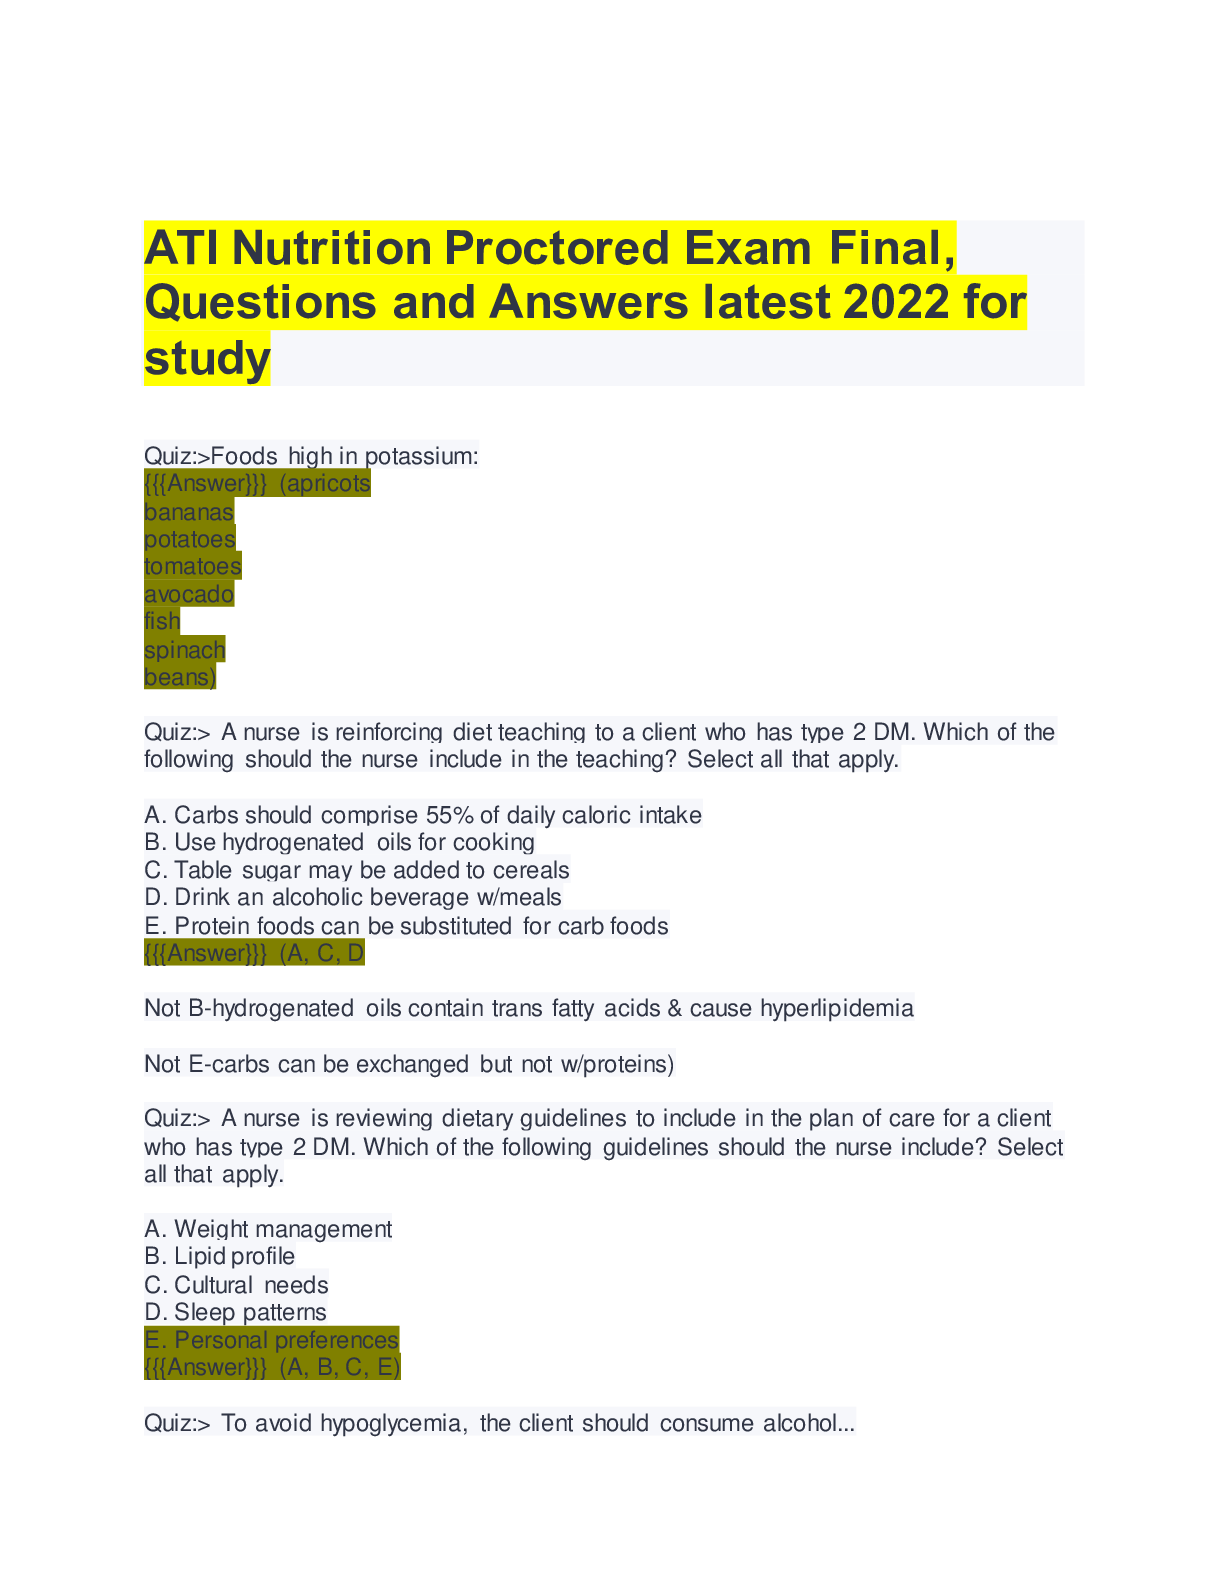 ATI Nutrition Proctored Exam Final, Questions and Answers latest 2022